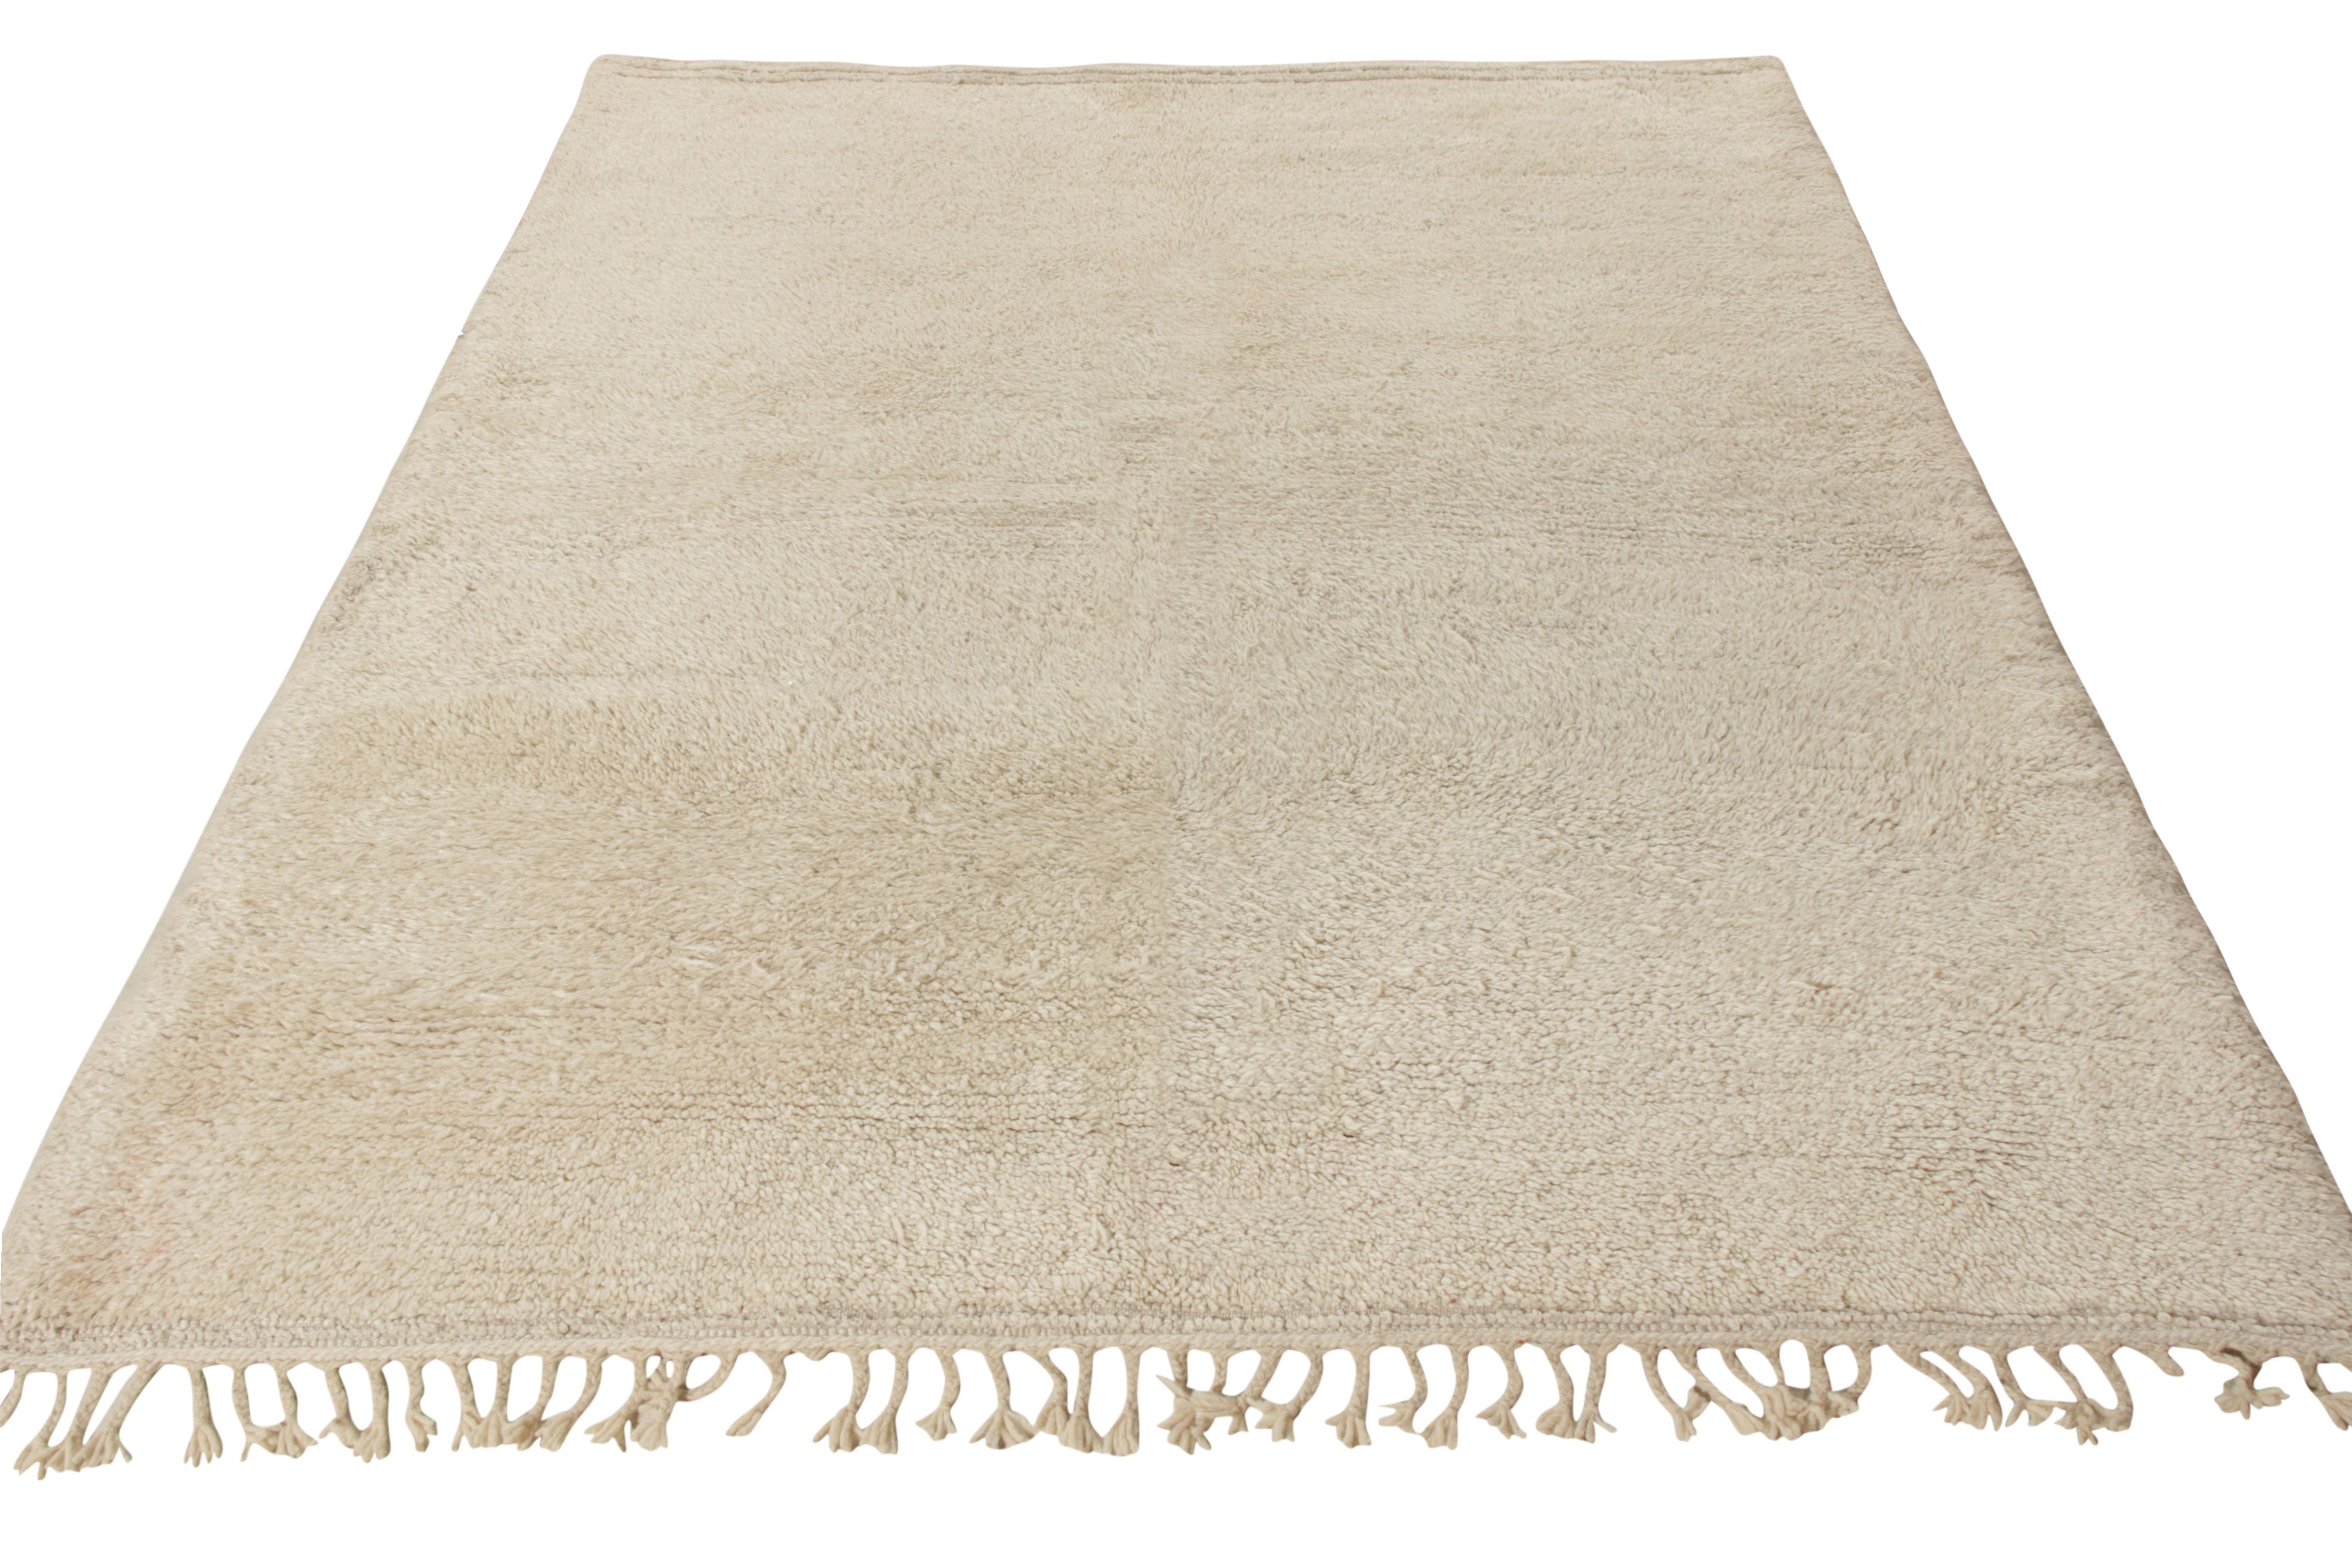 A 6x7 Berber style vintage Moroccan rug, hand knotted in wool circa 1950-1960. This luscious rug in tone-on-tone beige white spells a surreal vibe with its distinctive texture and design approach that carries a high-low weave on one end and fine